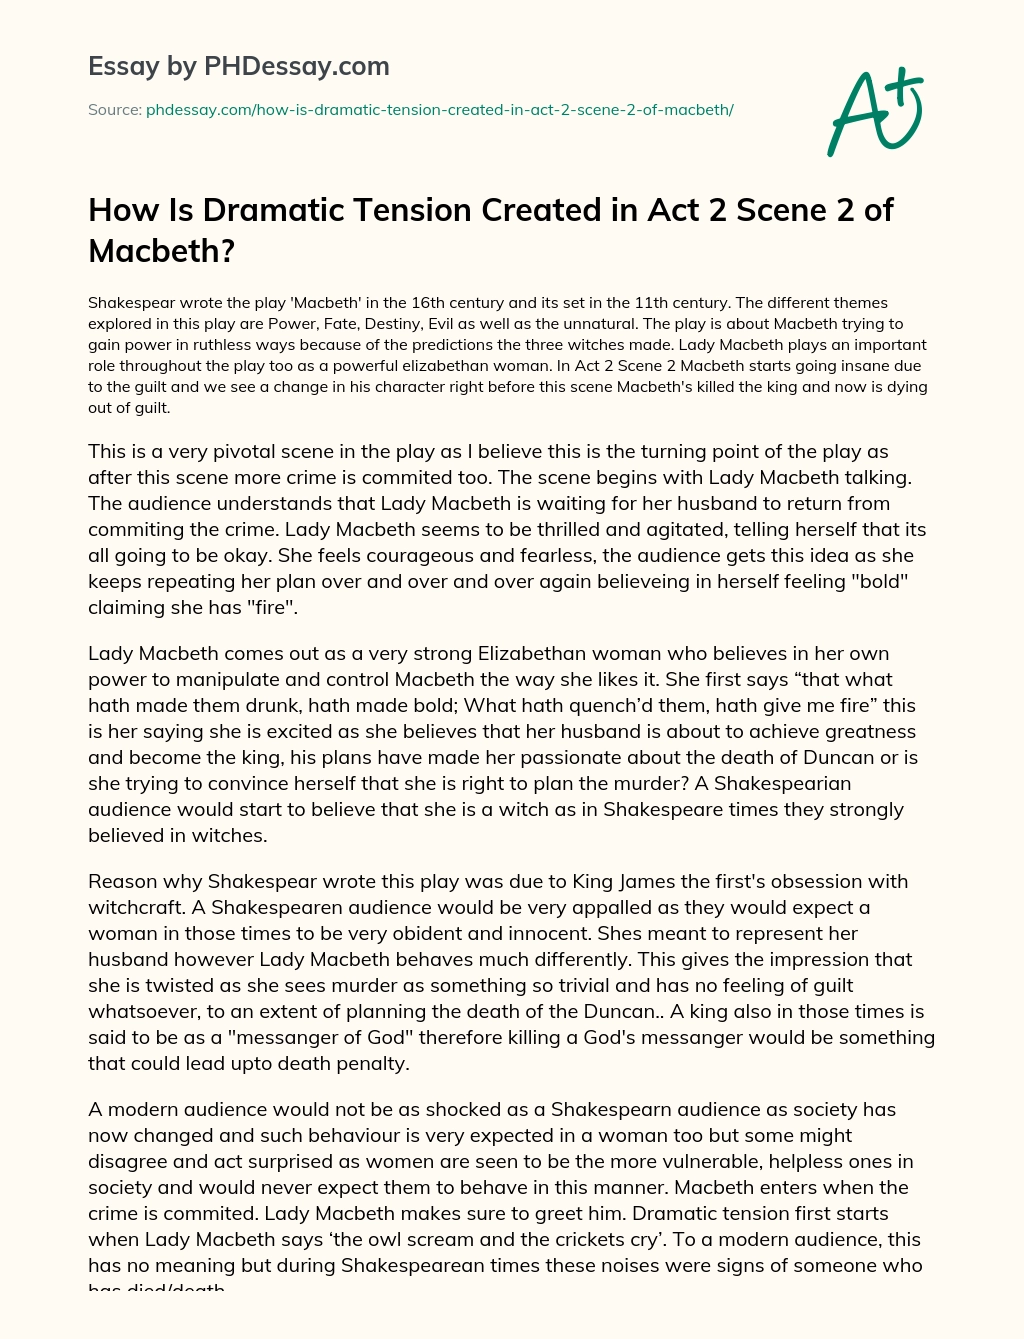 How Is Dramatic Tension Created in Act 2 Scene 2 of Macbeth? essay